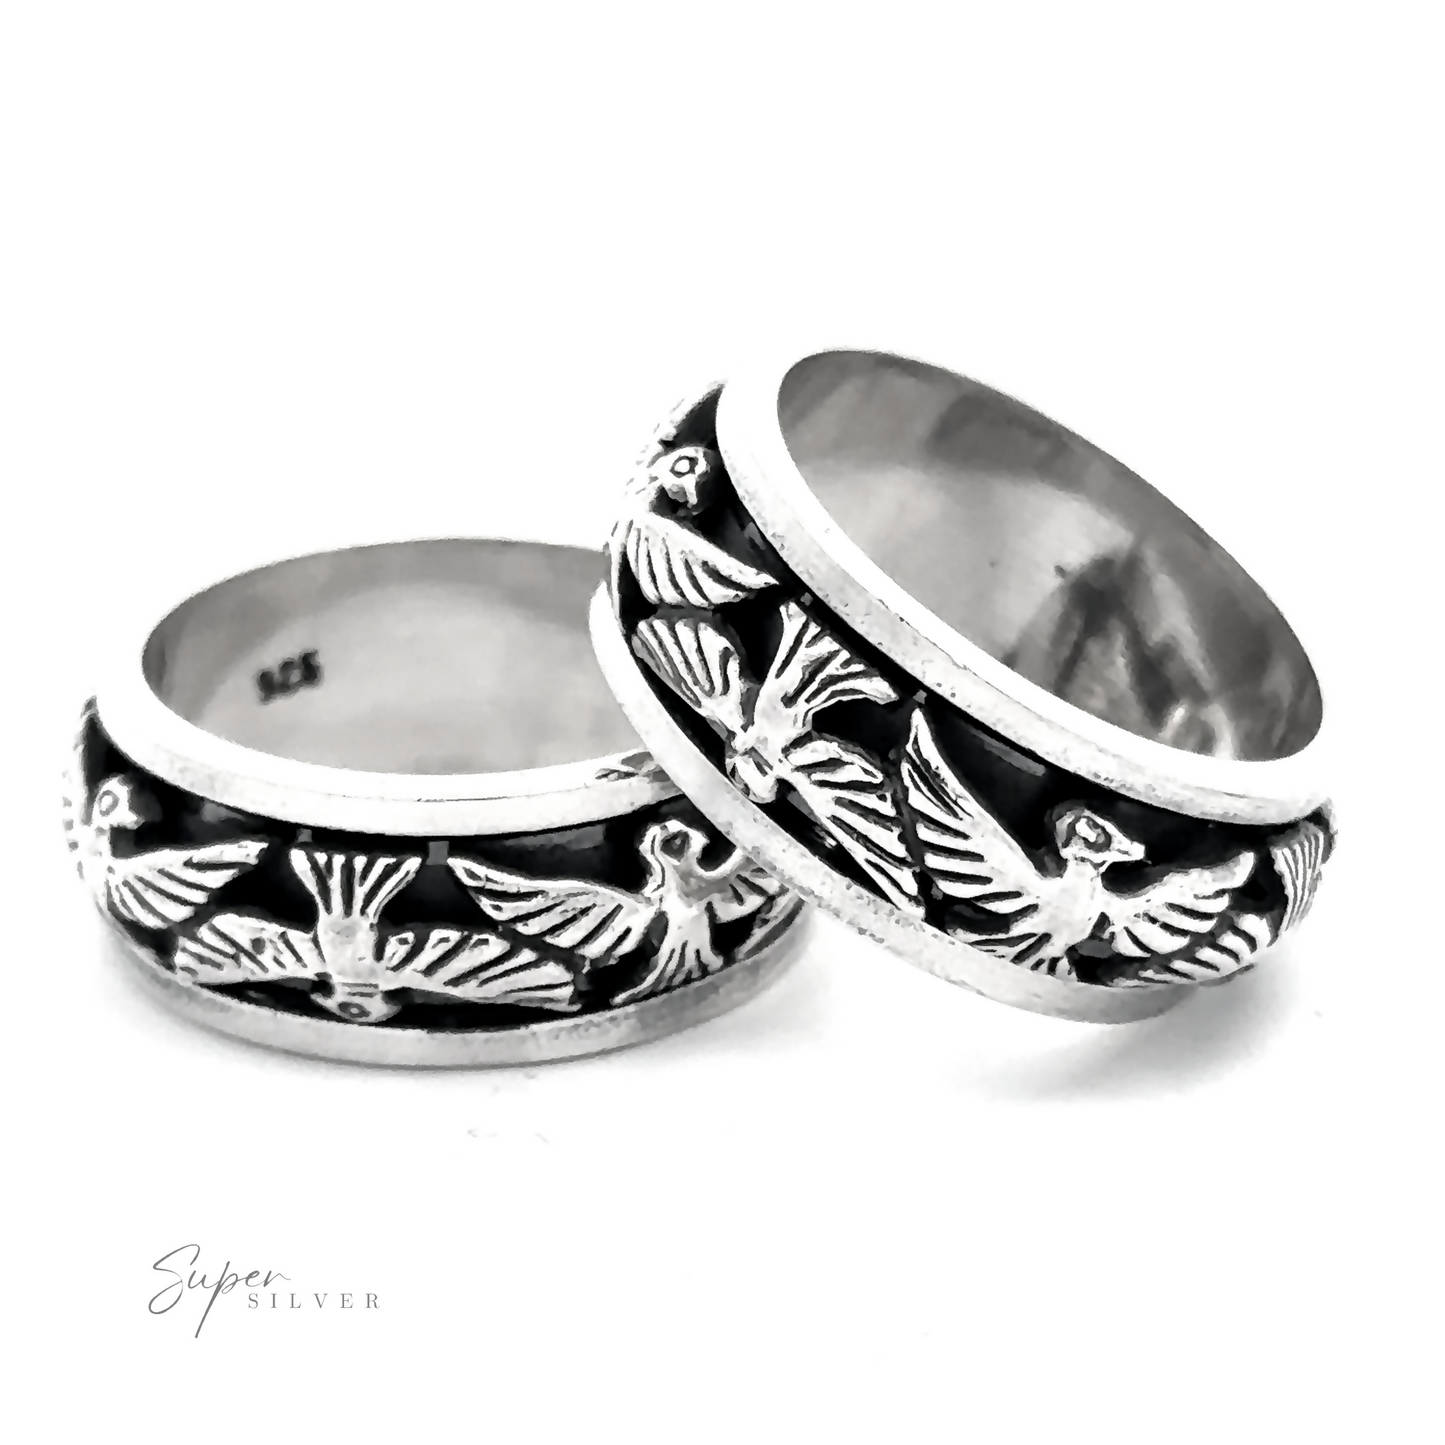 Two Thick Thunderbird Spinner Rings with intricate thunderbird engravings, showing both interior and exterior views. One ring is leaning against the other. The inscription "925" is visible on the inside of both rings.